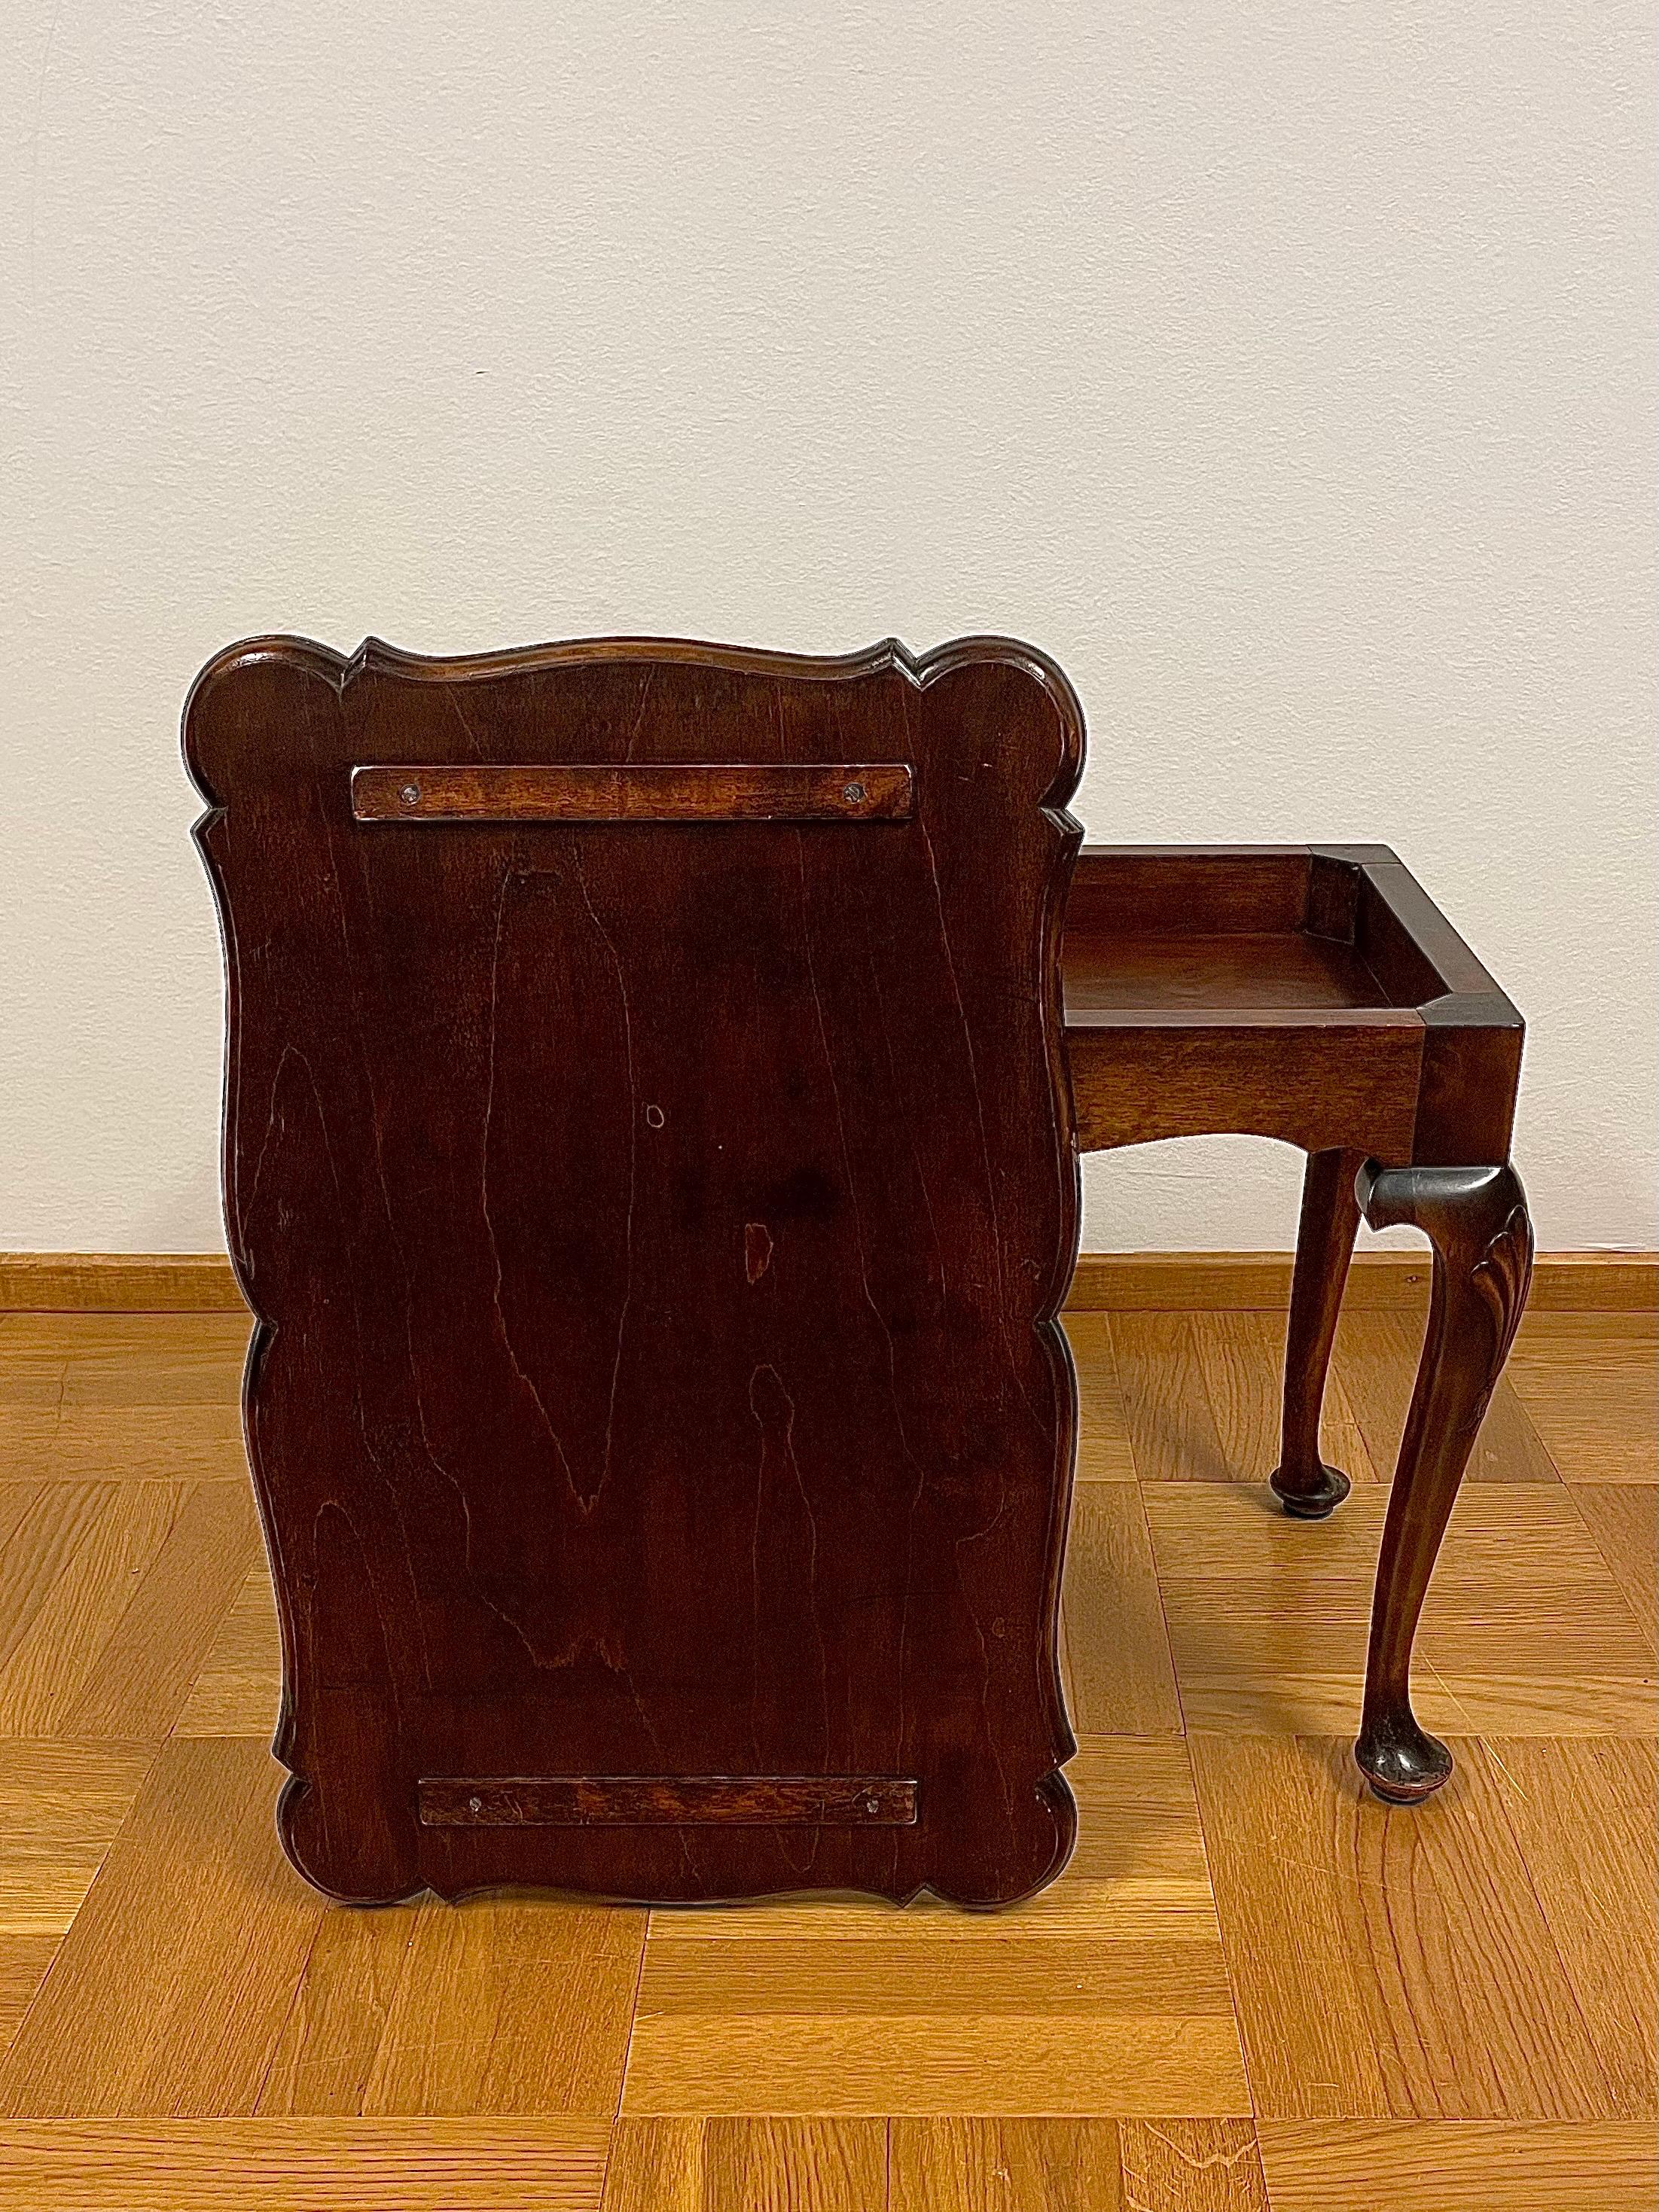 Swedish Tray Table in Stained Birch Manufactured 13/3 1929 by Nordiska Kompaniet For Sale 5